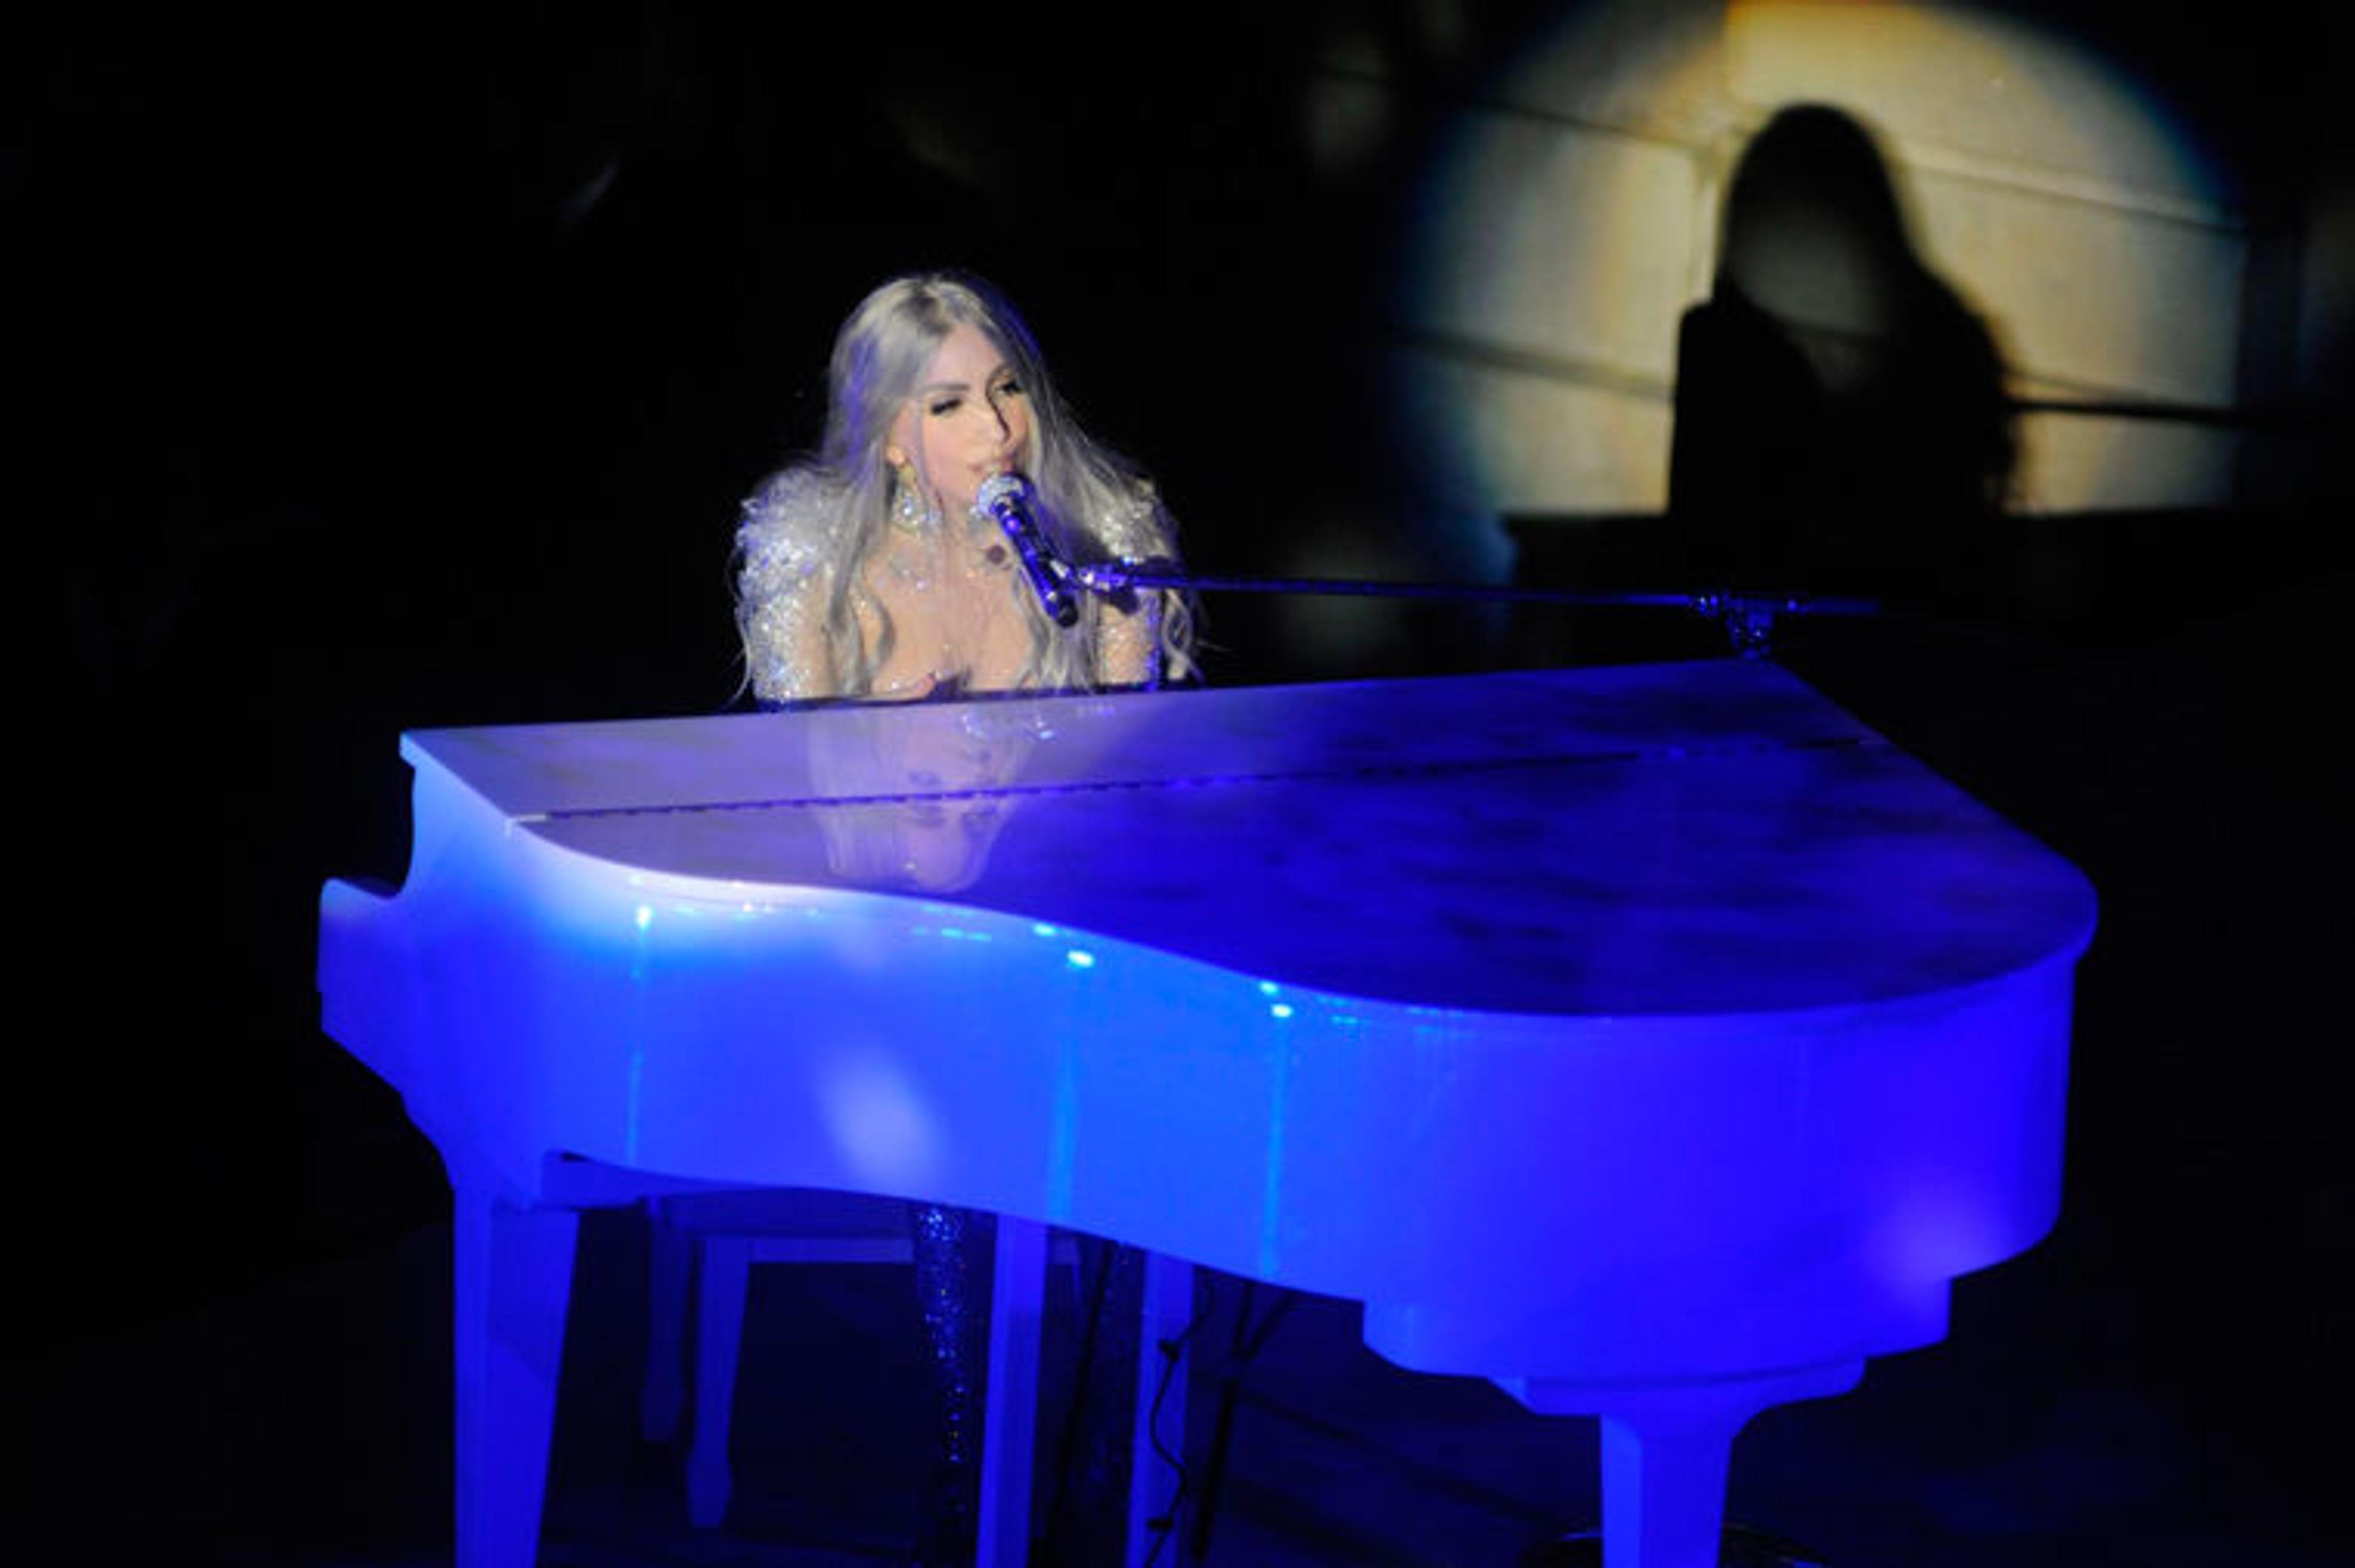 Lady Gaga performs while seated at a blue-lit piano